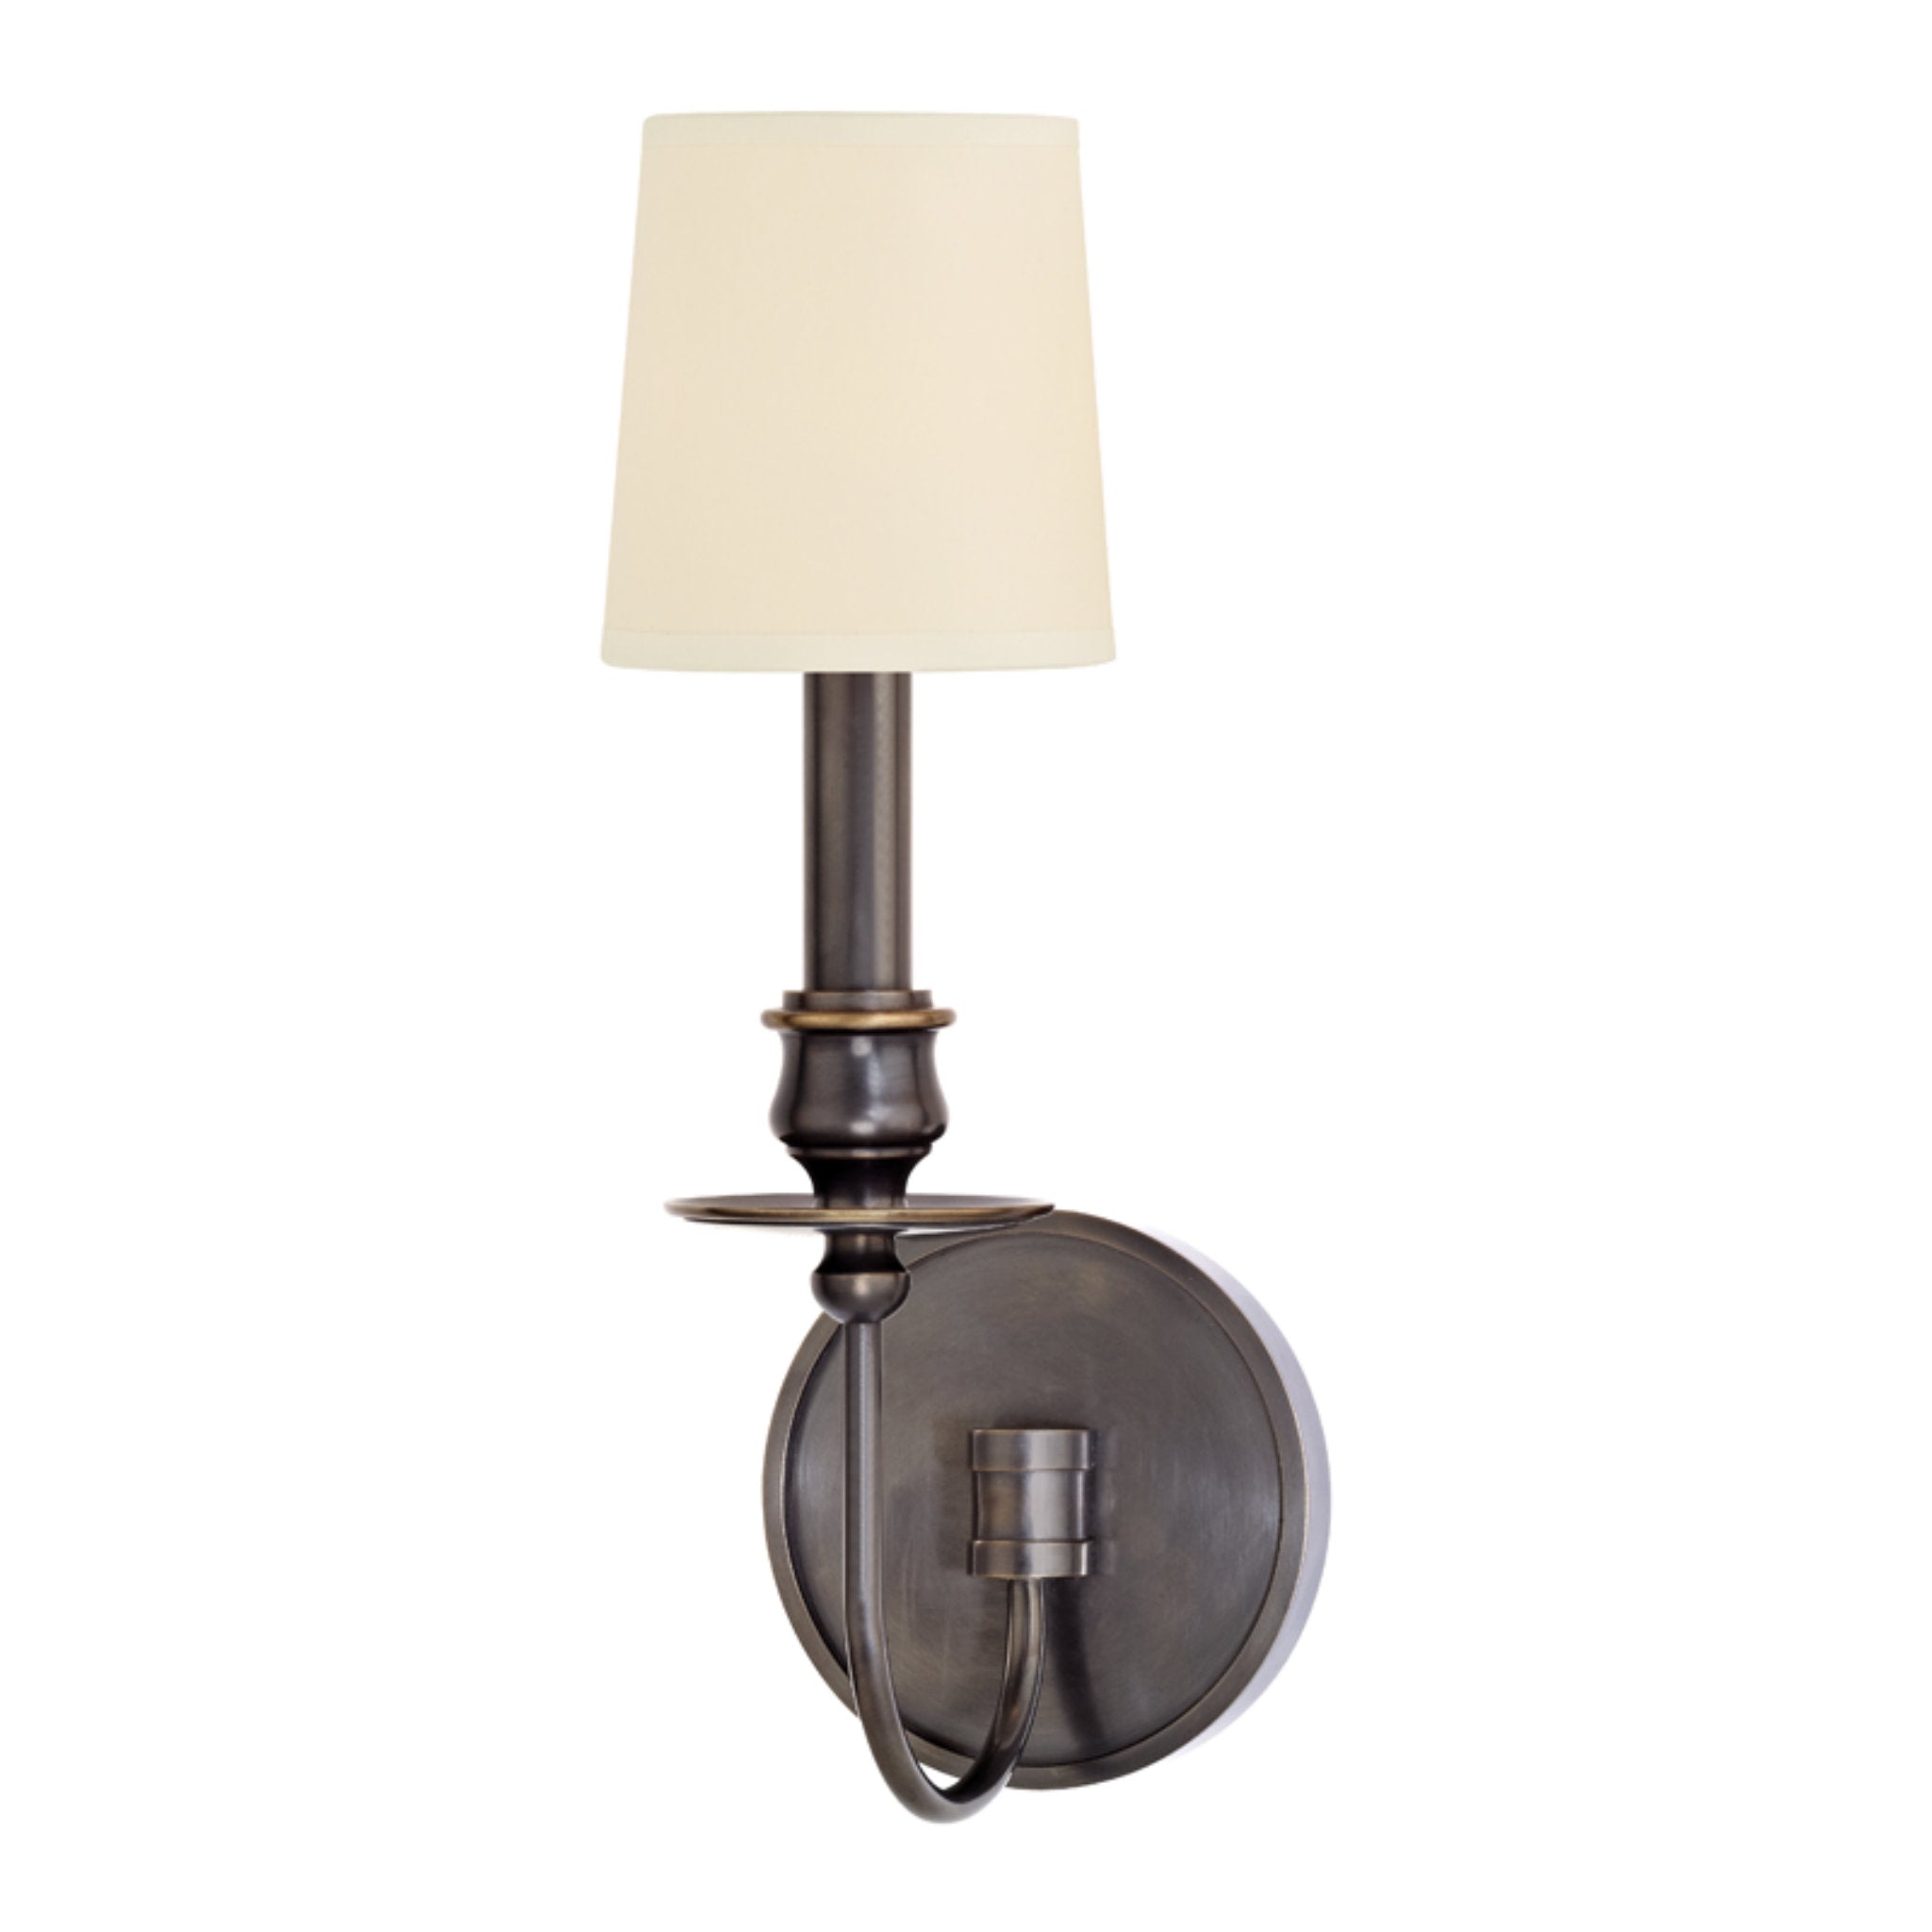 Cohasset 1 Light Wall Sconce in Old Bronze